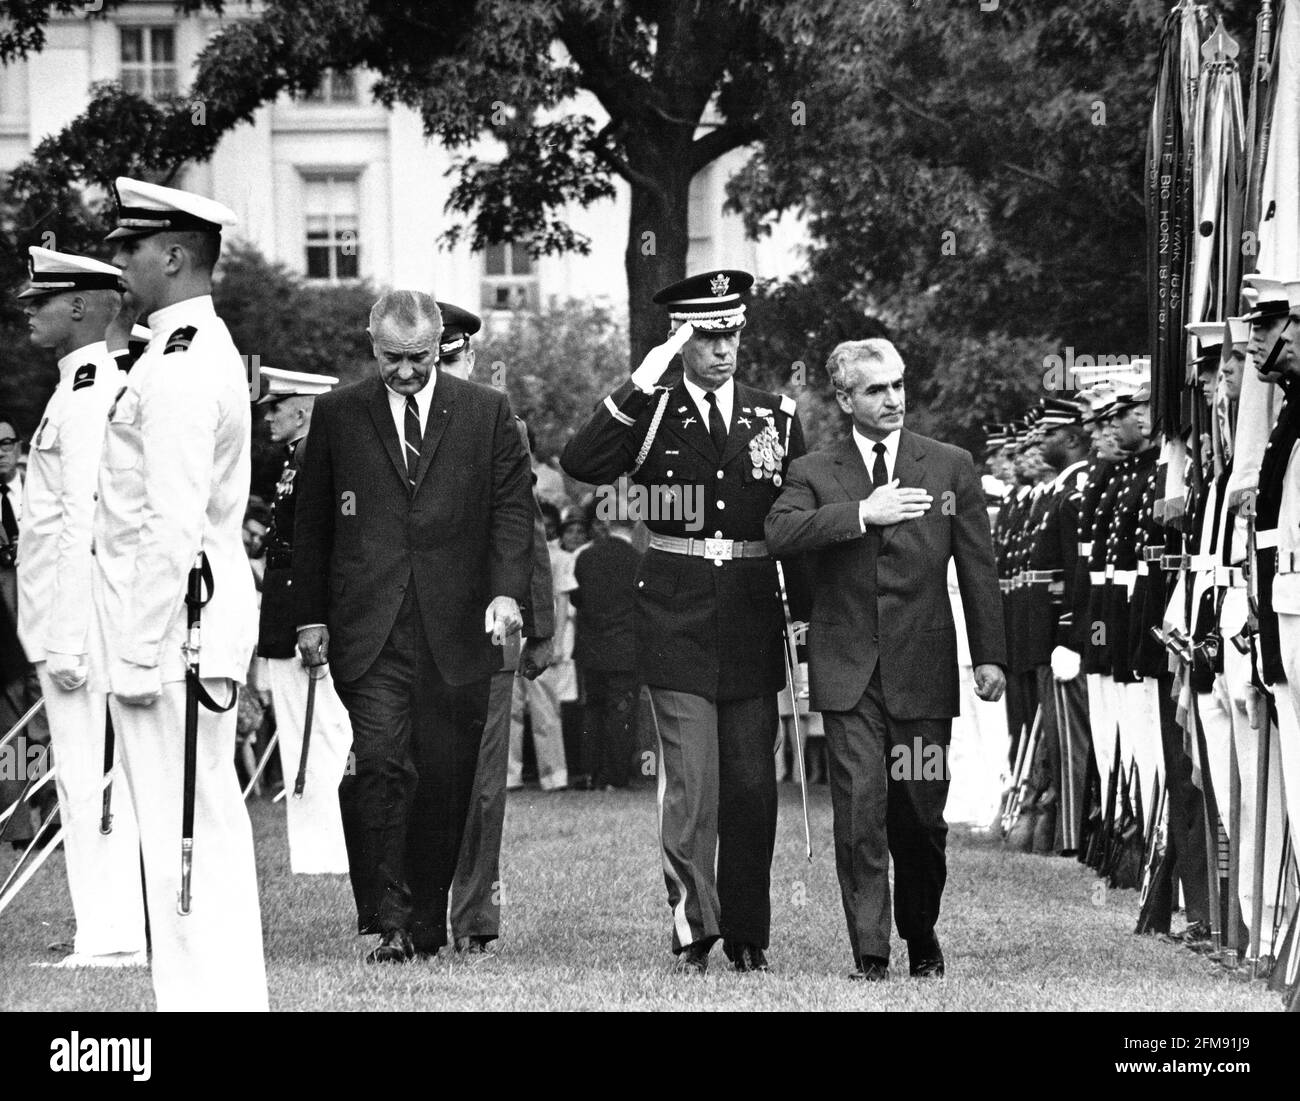 United States President Lyndon B. Johnson, left, and Commander of the Troops, US Army Colonel Joseph Conmy, Jr., center, escort Mohammad Reza Pahlavi, the Shah of Iran, right, troop the line during a full honor arrival ceremony on the South Lawn of the White House in Washington, DC on August 22, 1967. The Shah is in Washington for an informal visit.Credit: Arnie Sachs/CNP/Sipa USA Credit: Sipa USA/Alamy Live News Stock Photo